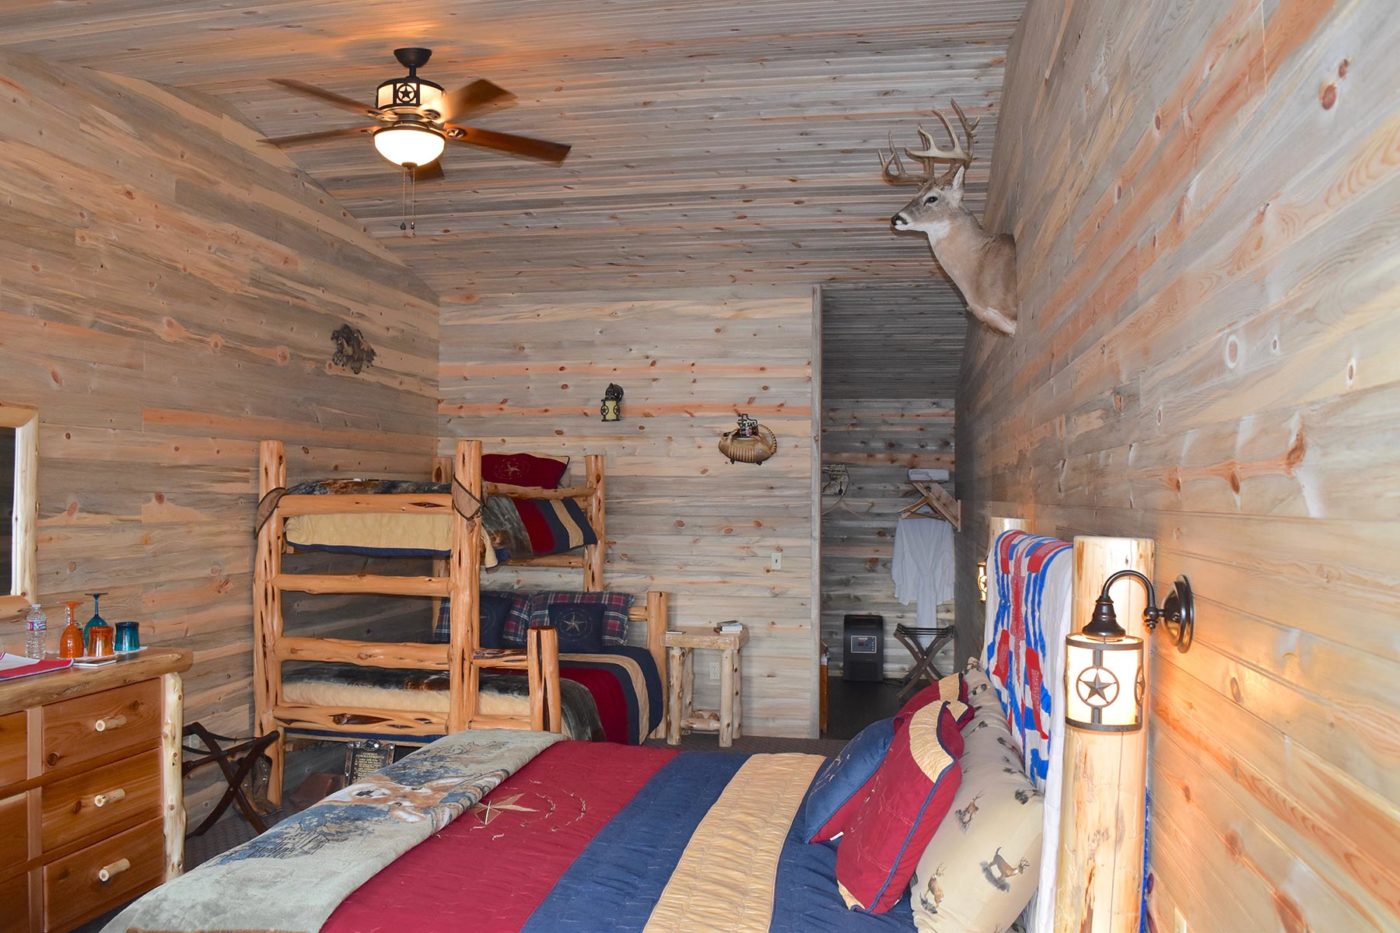 Guest room with queen bed and bunks.